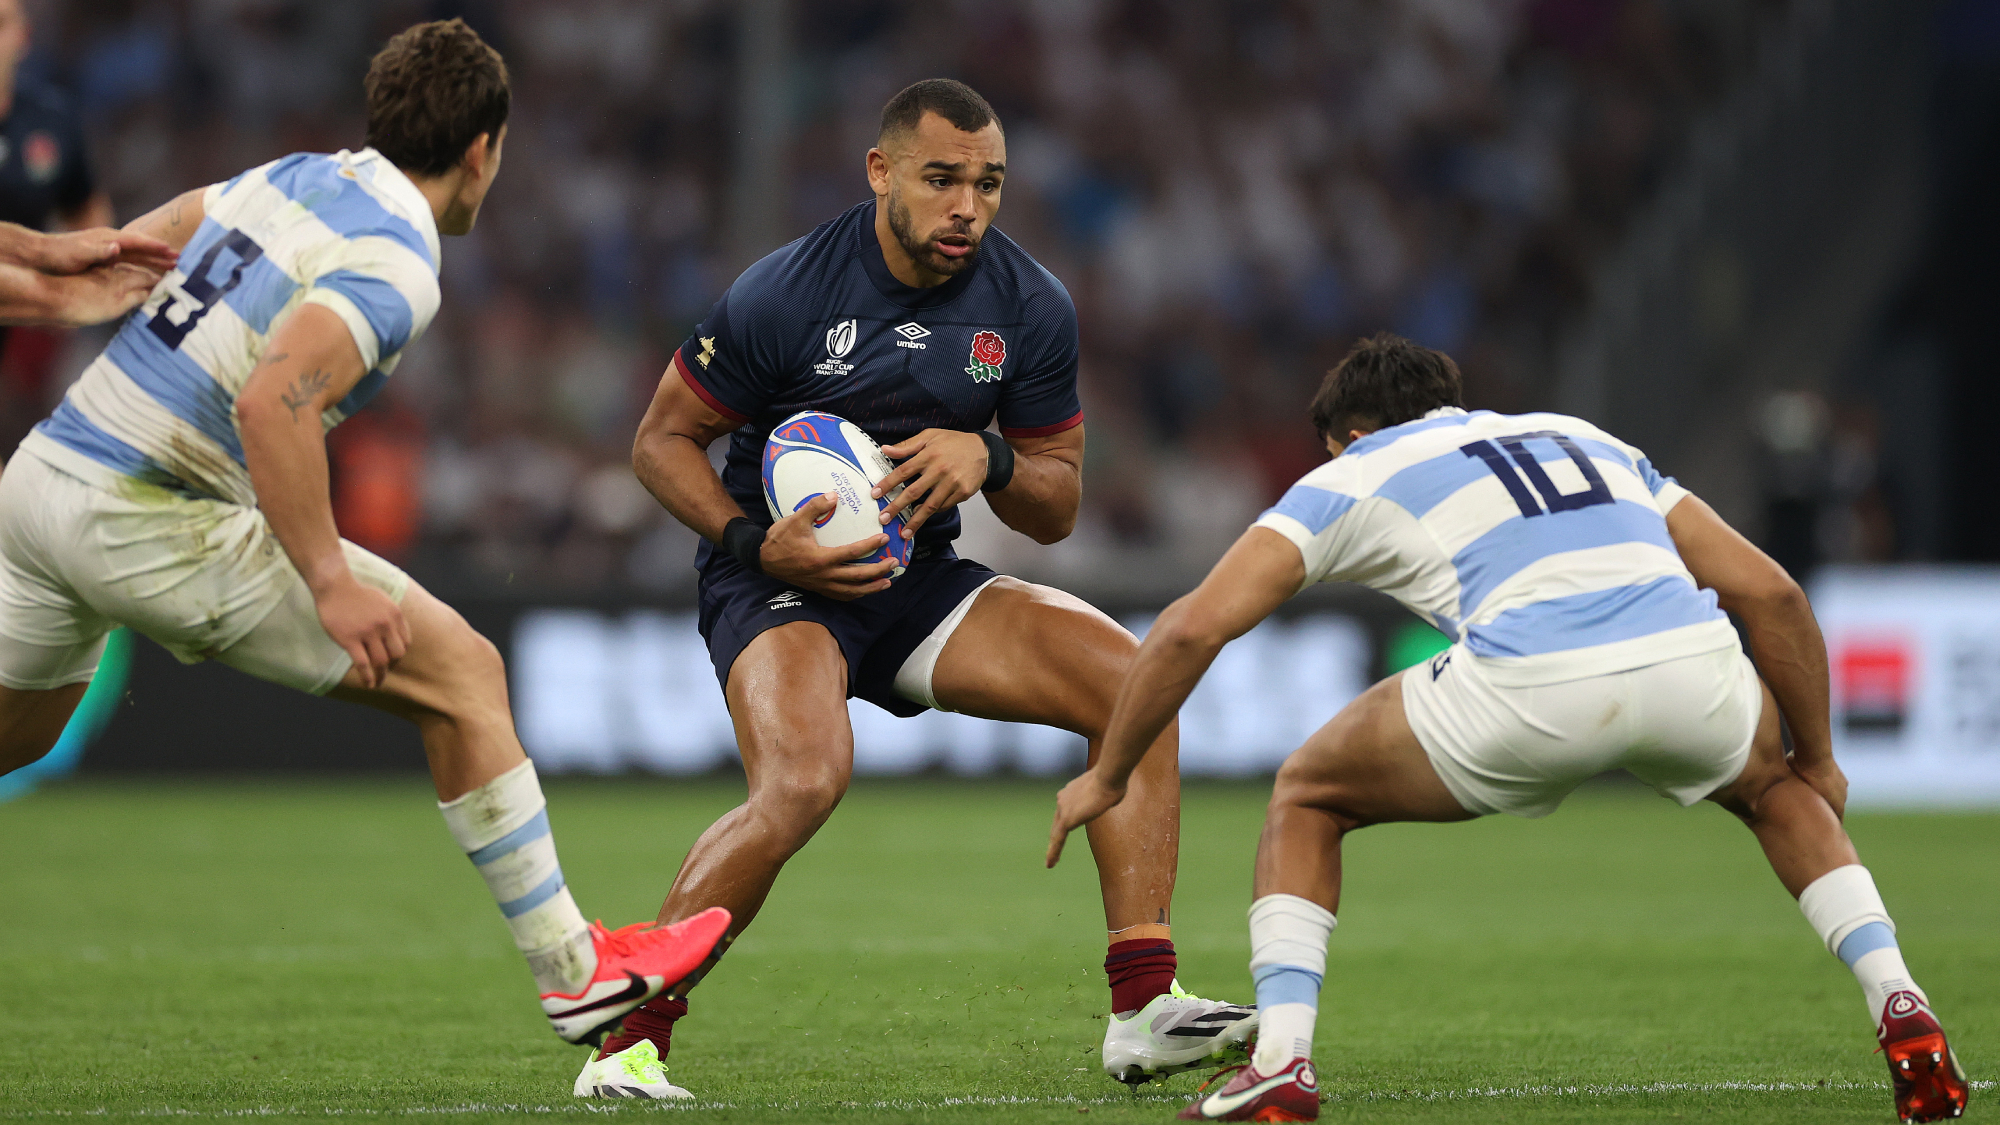 watch the england rugby game live